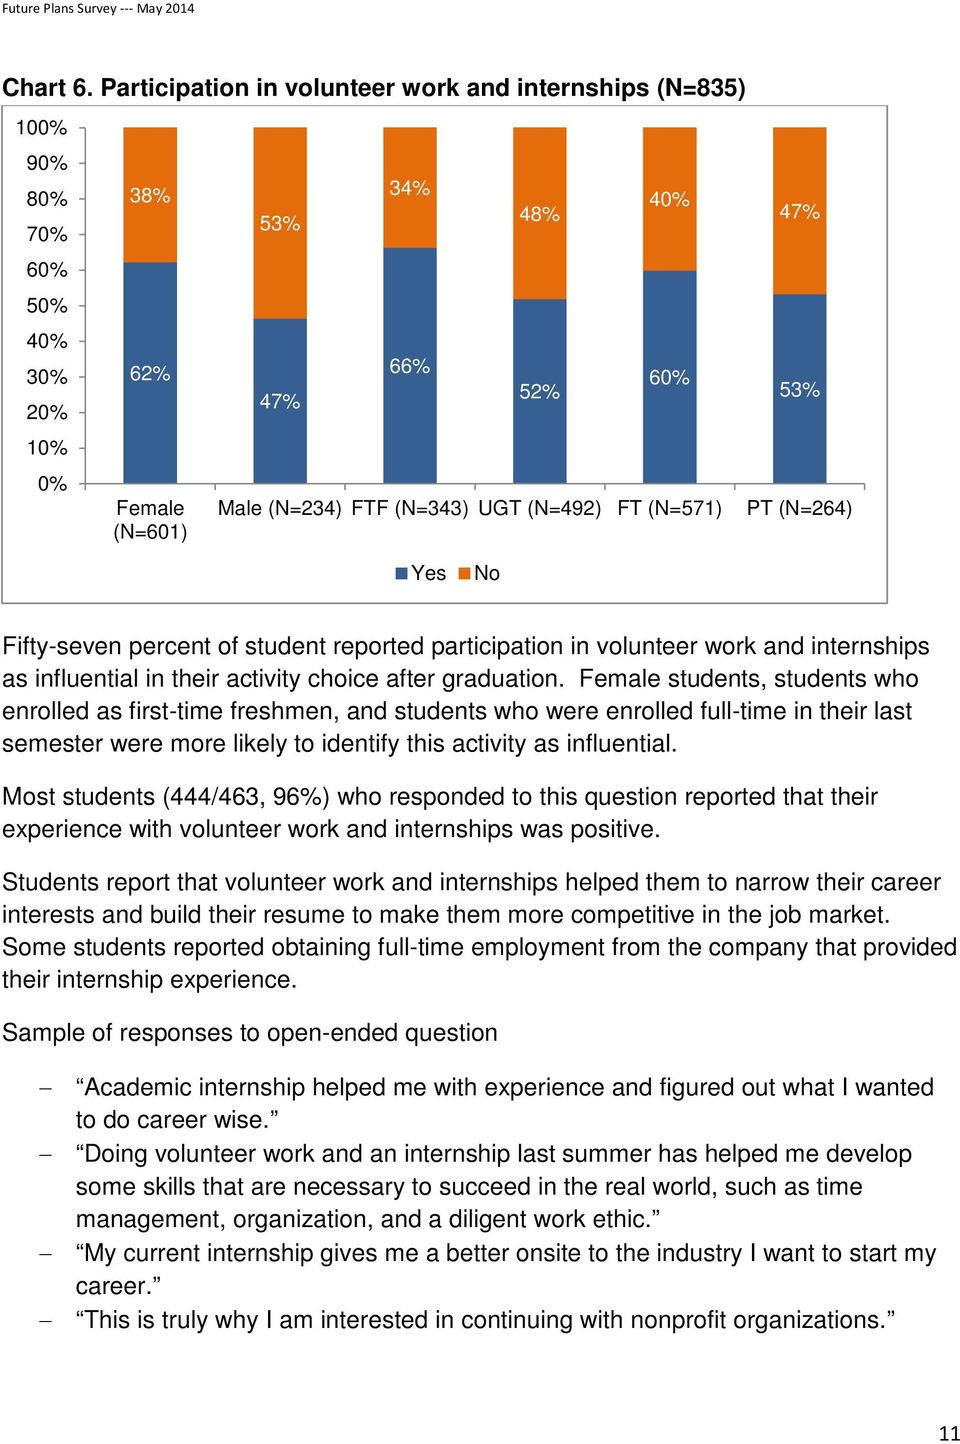 Fifty-seven percent of student reported participation in volunteer work and internships as influential in their activity choice after graduation.